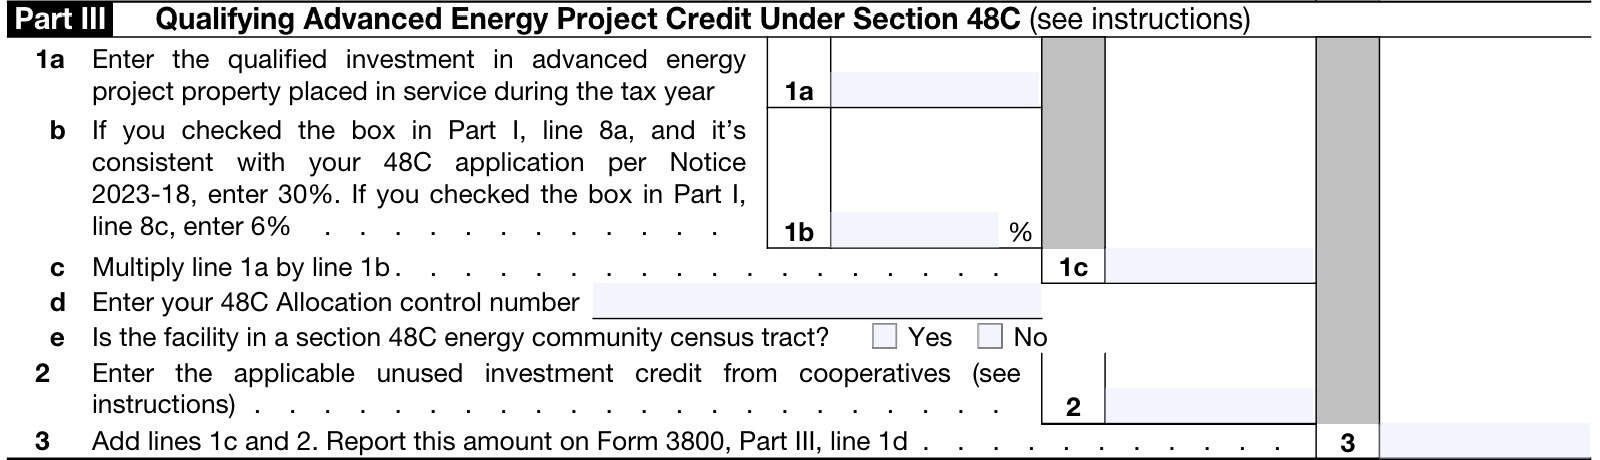 irs form 3468, part iii: qualifying advanced energy project credit under Section 48C